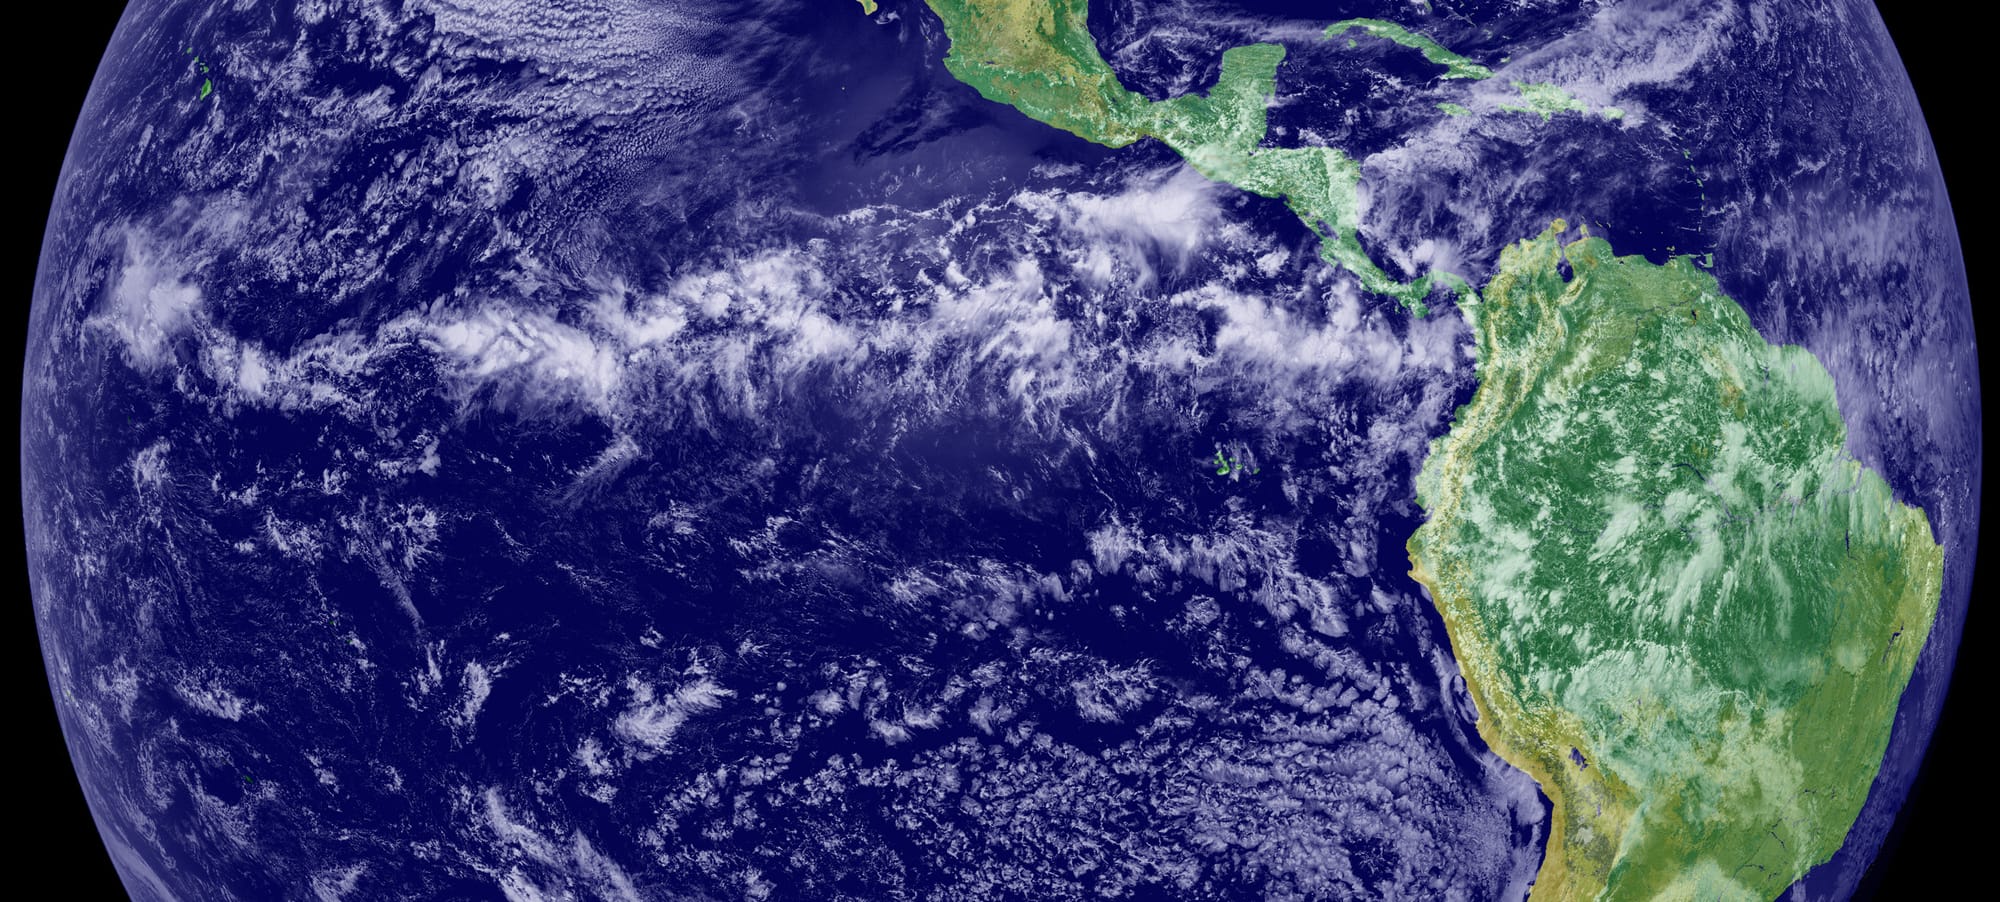 Why Are There Constantly Thunderstorms Across the Equator?